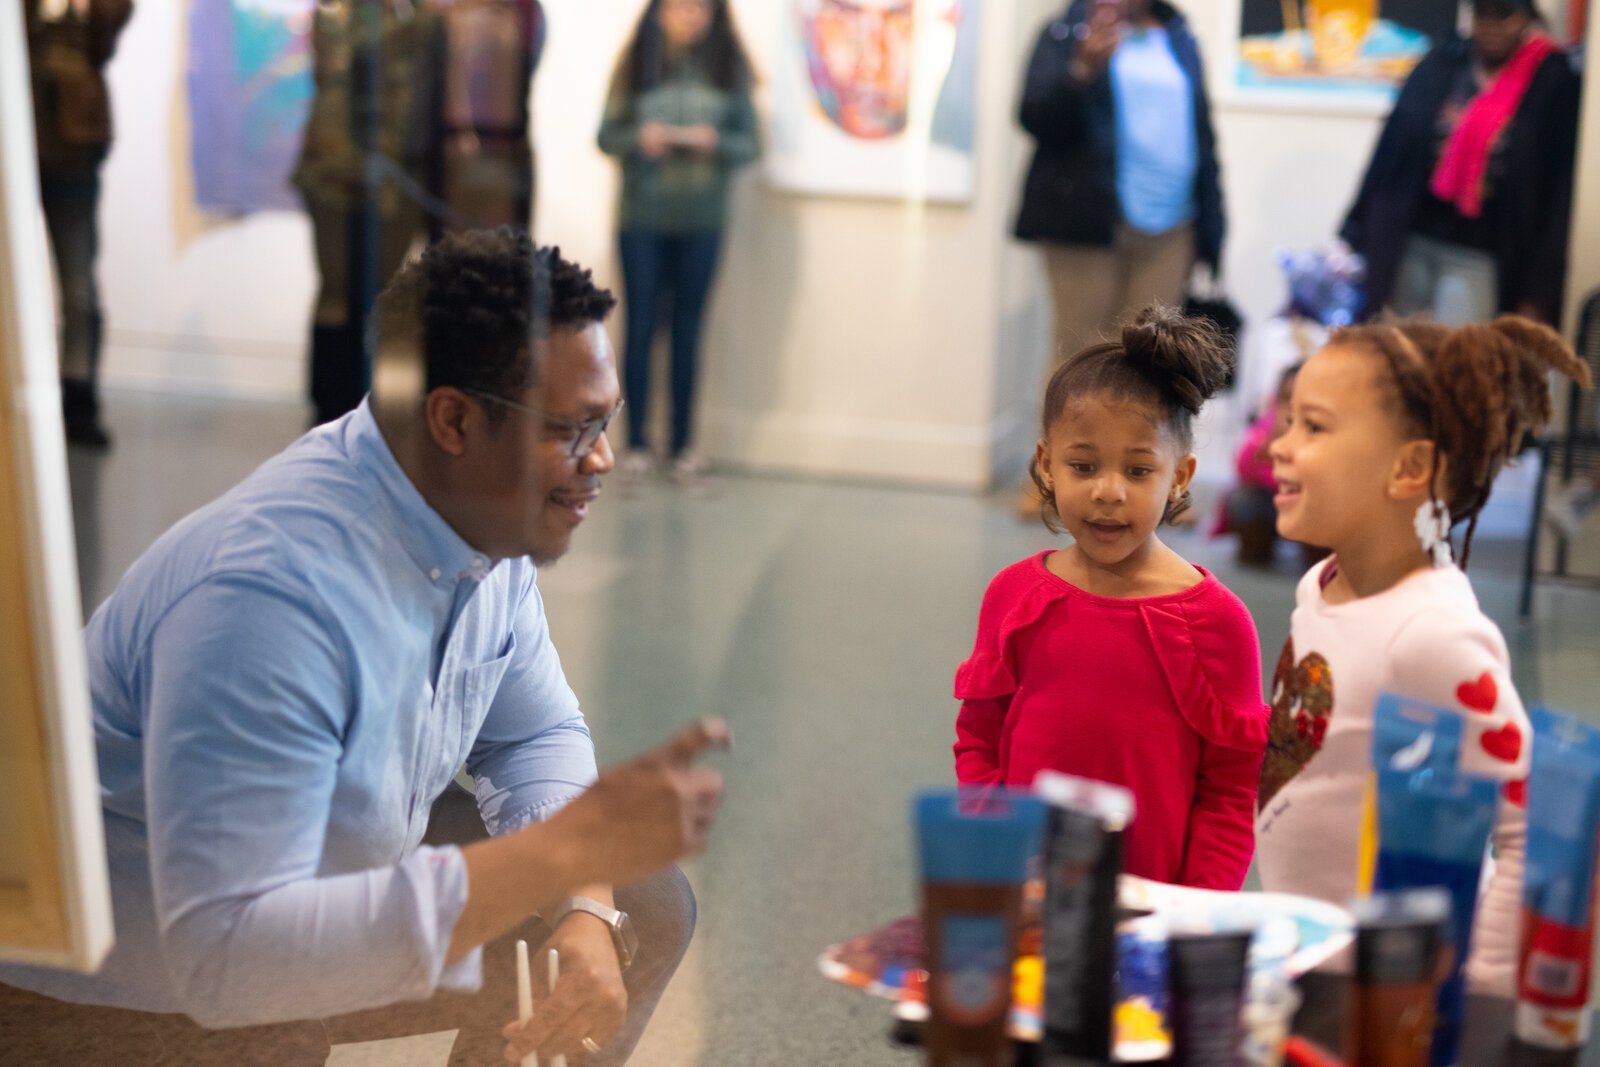 Theopolis Smith III, the artist behind Phresh Laundry, talks to children at the Jeffrey R. Krull Art Gallery inside the Allen County Public Library in 2019.